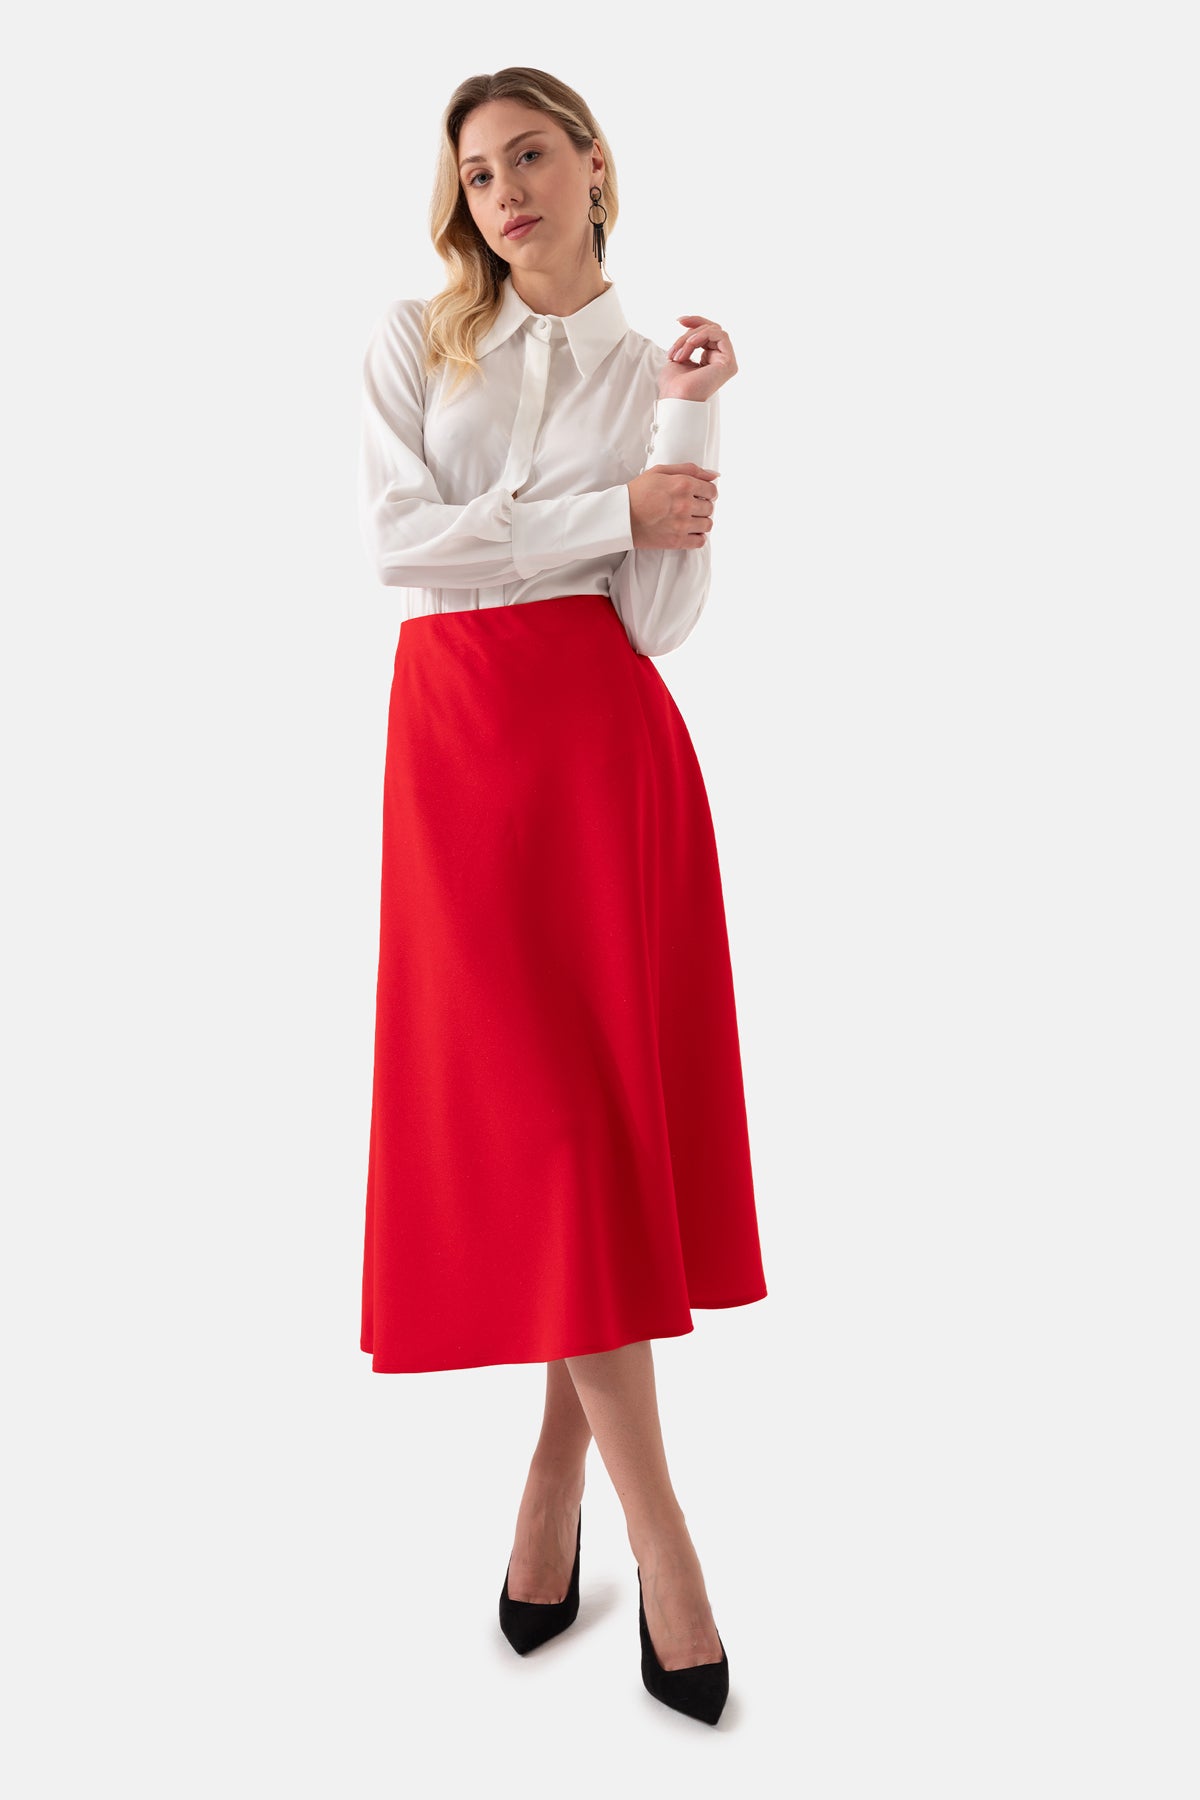 Red Color Flared Women's Skirt with Elastic Waist